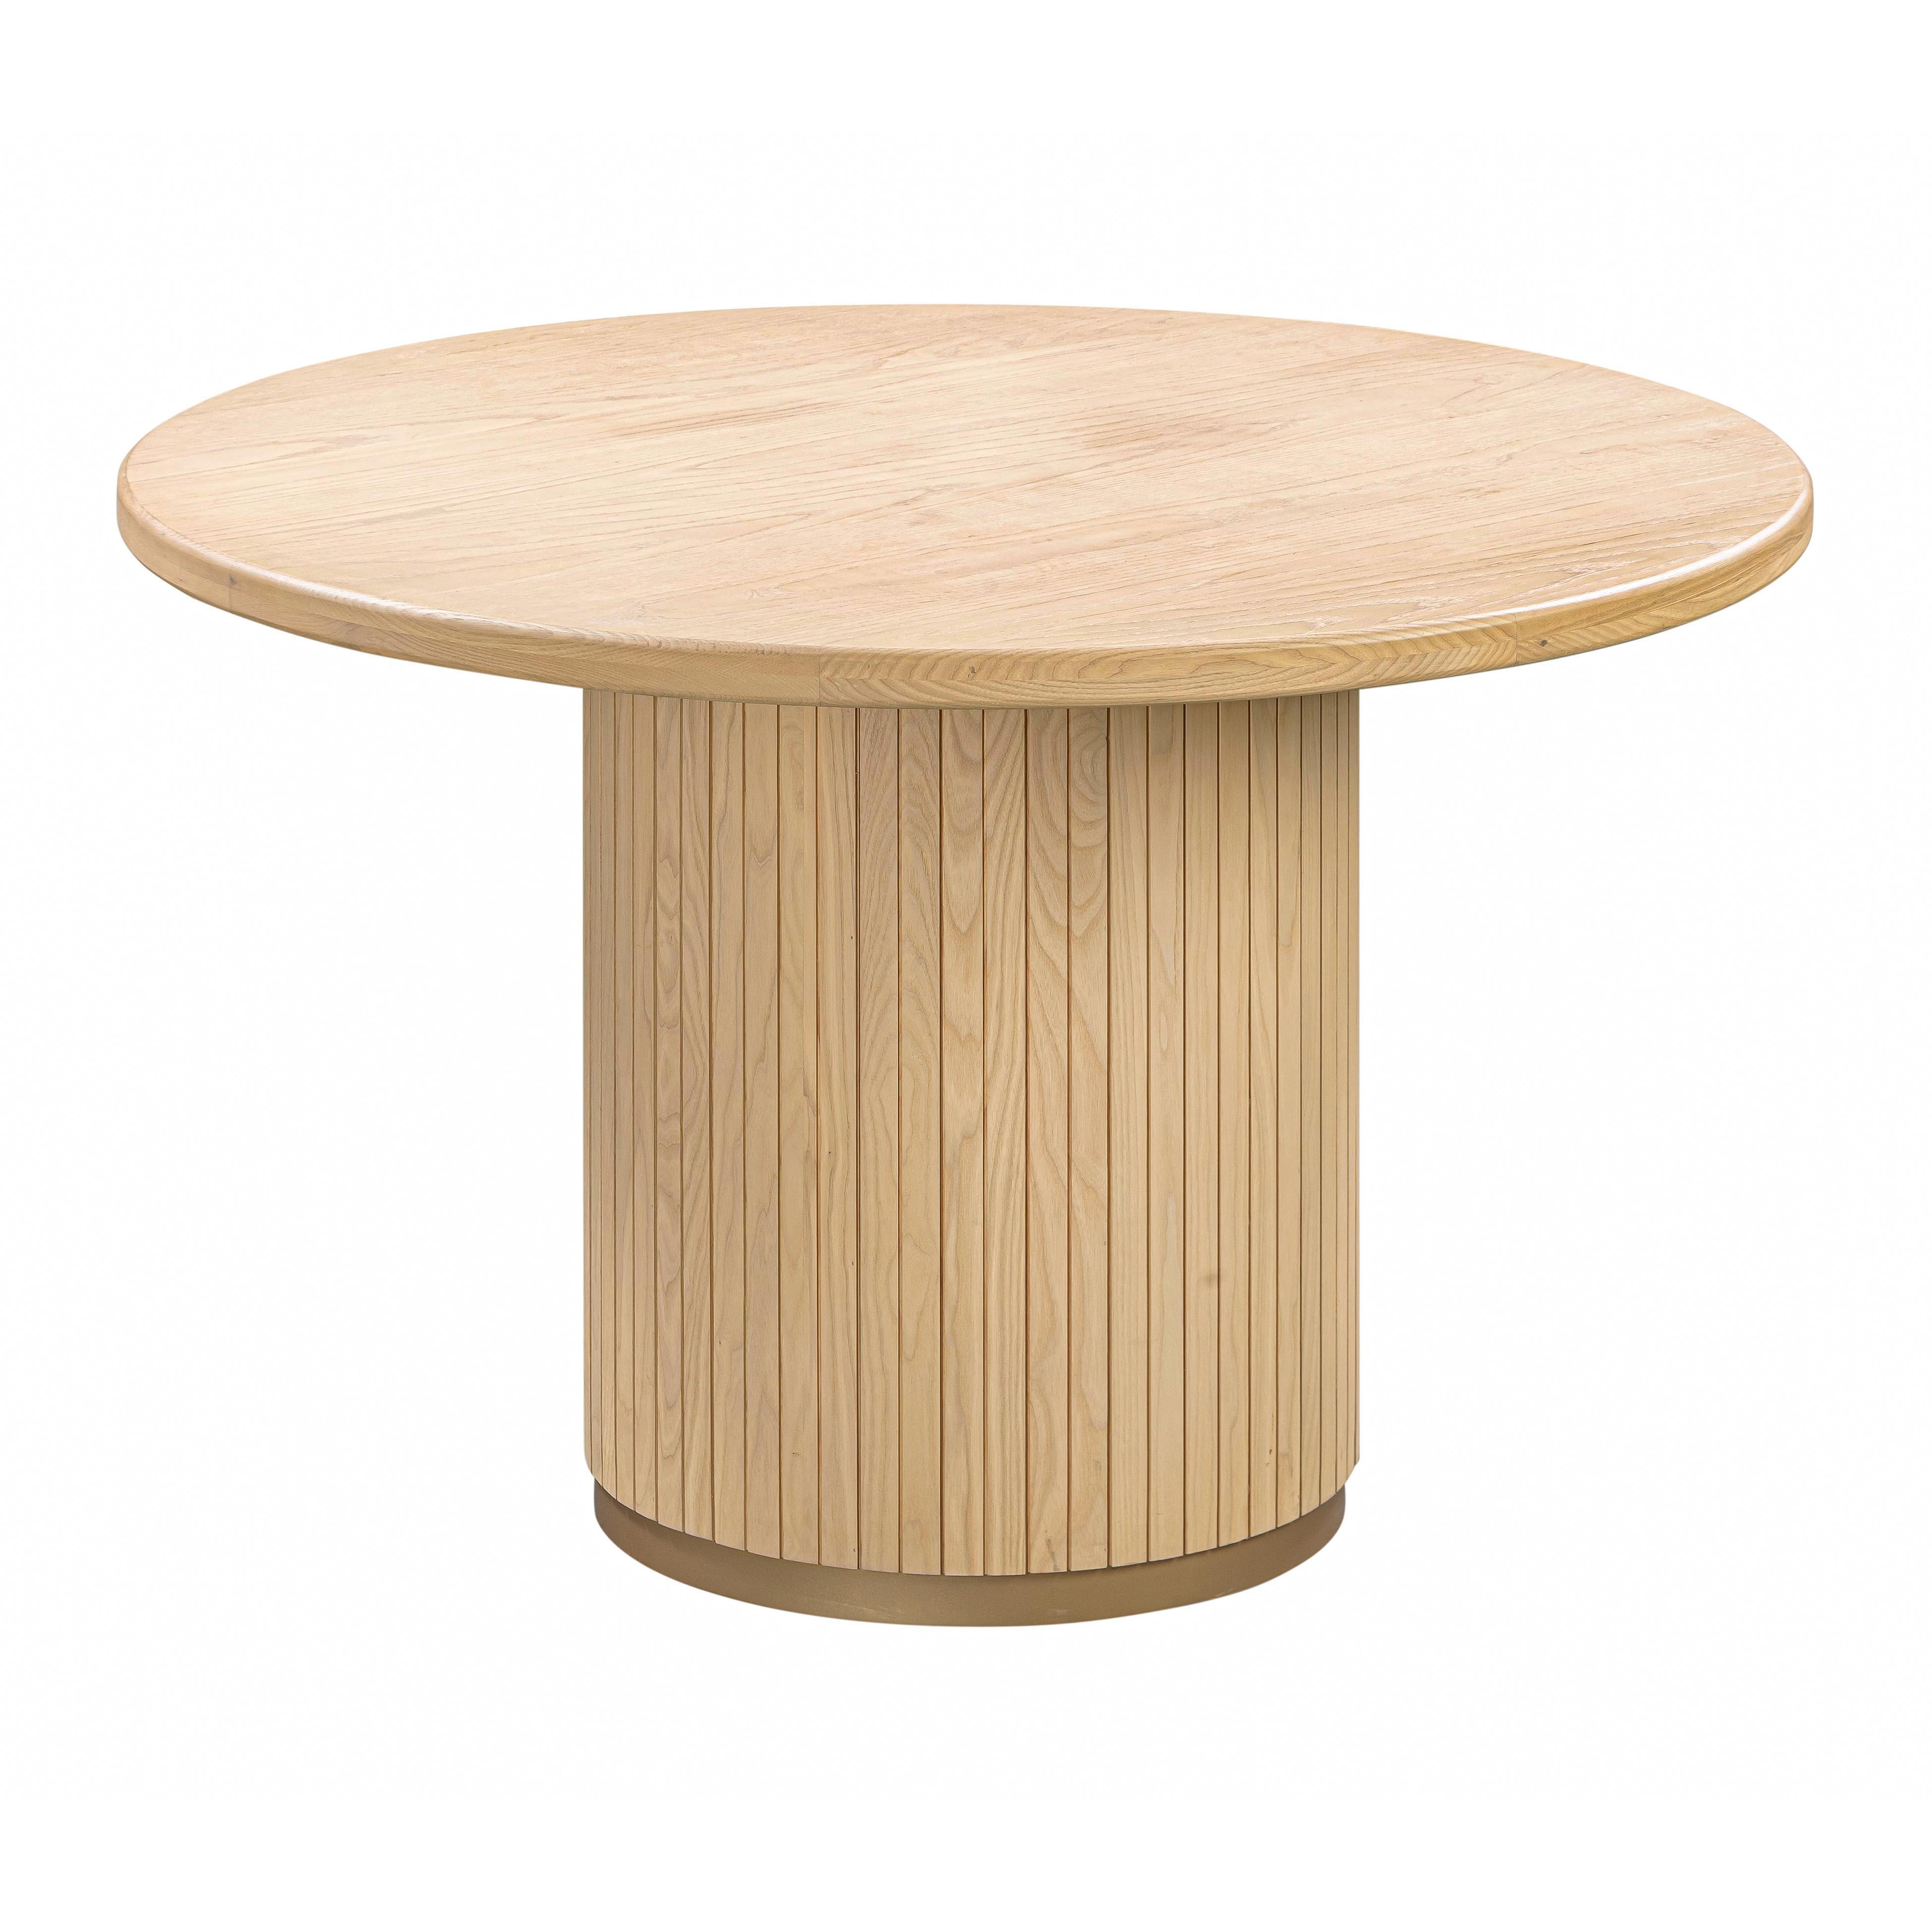 Chelsea Natural Oak Wood Round Dining Table - Image 1